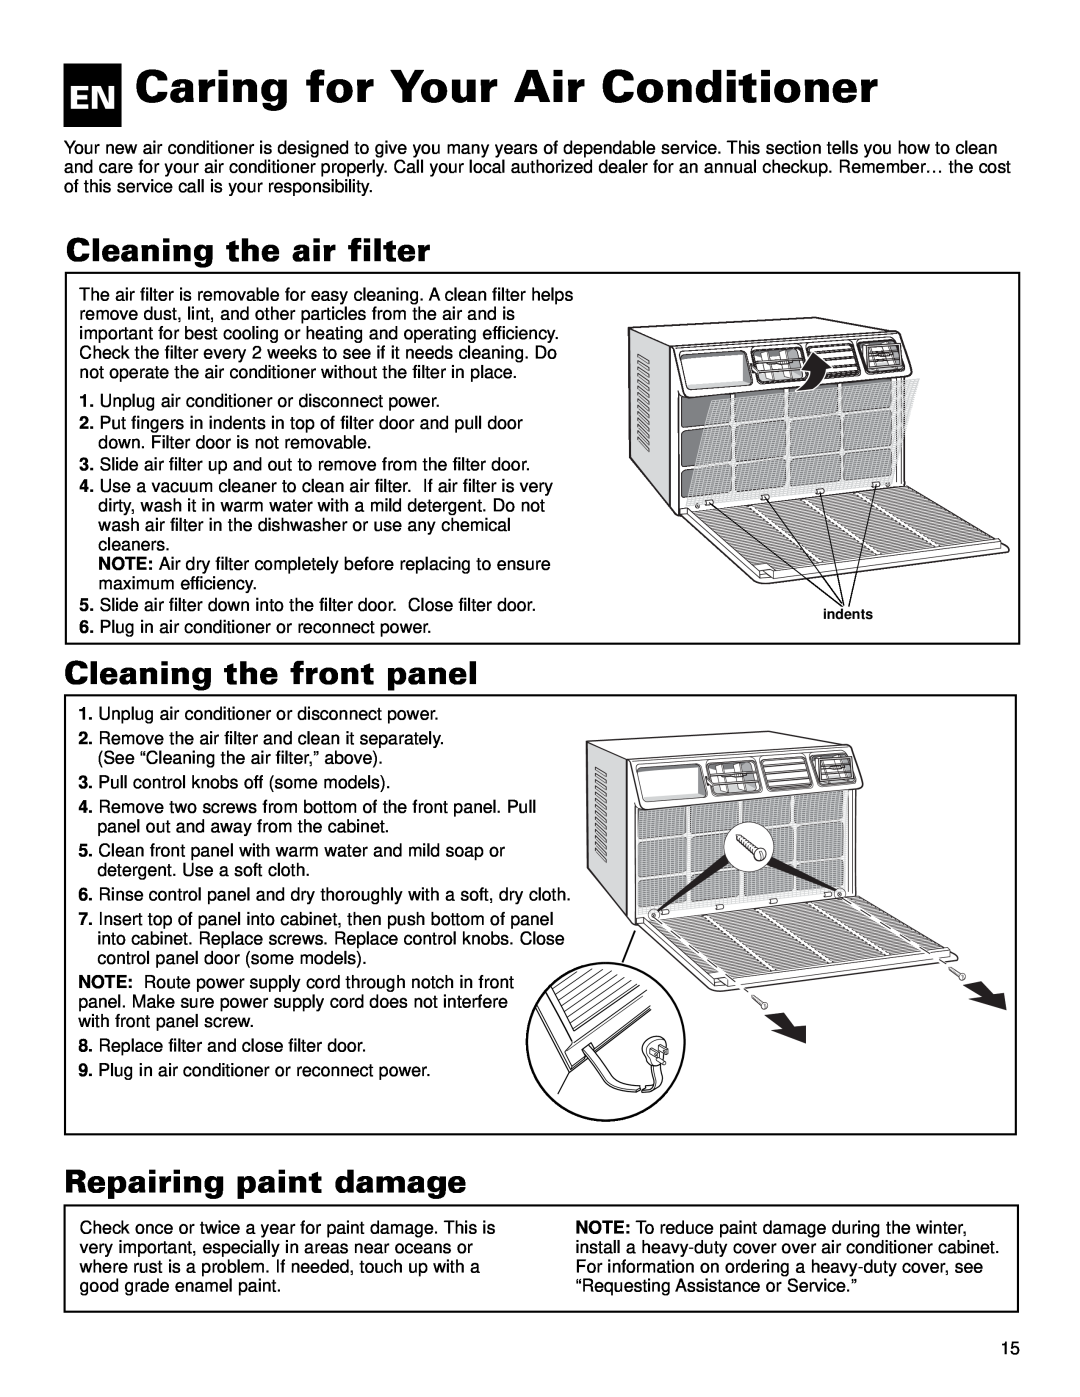 Whirlpool ACE184XL0 manual EN Caring for Your Air Conditioner, Cleaning the air filter, Cleaning the front panel 